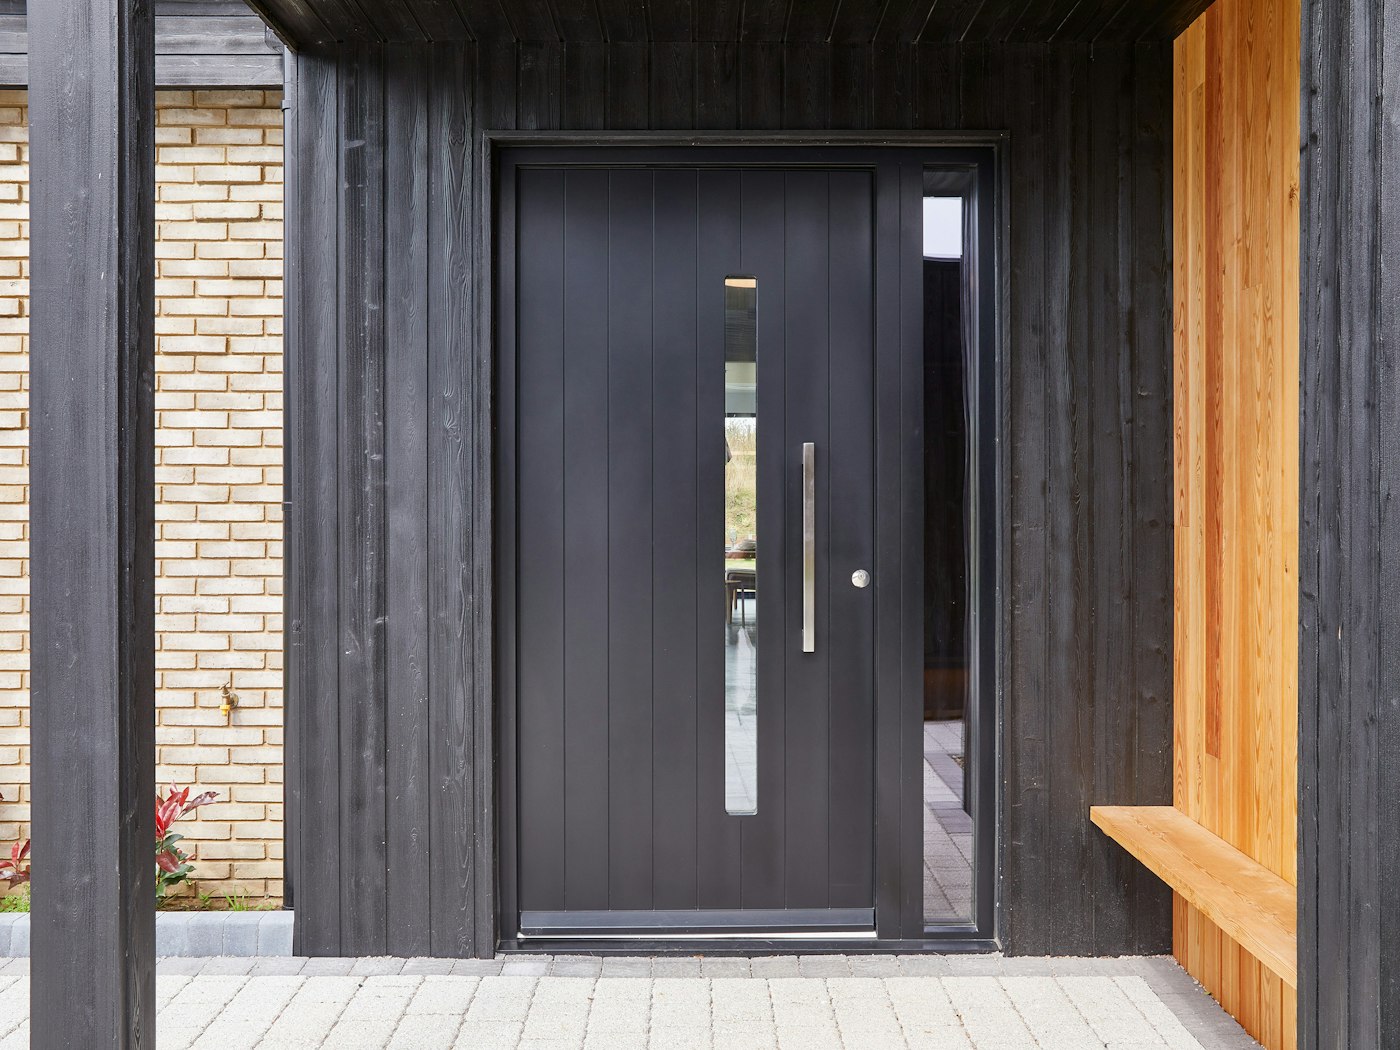 The Terano front door features a glass vision panel